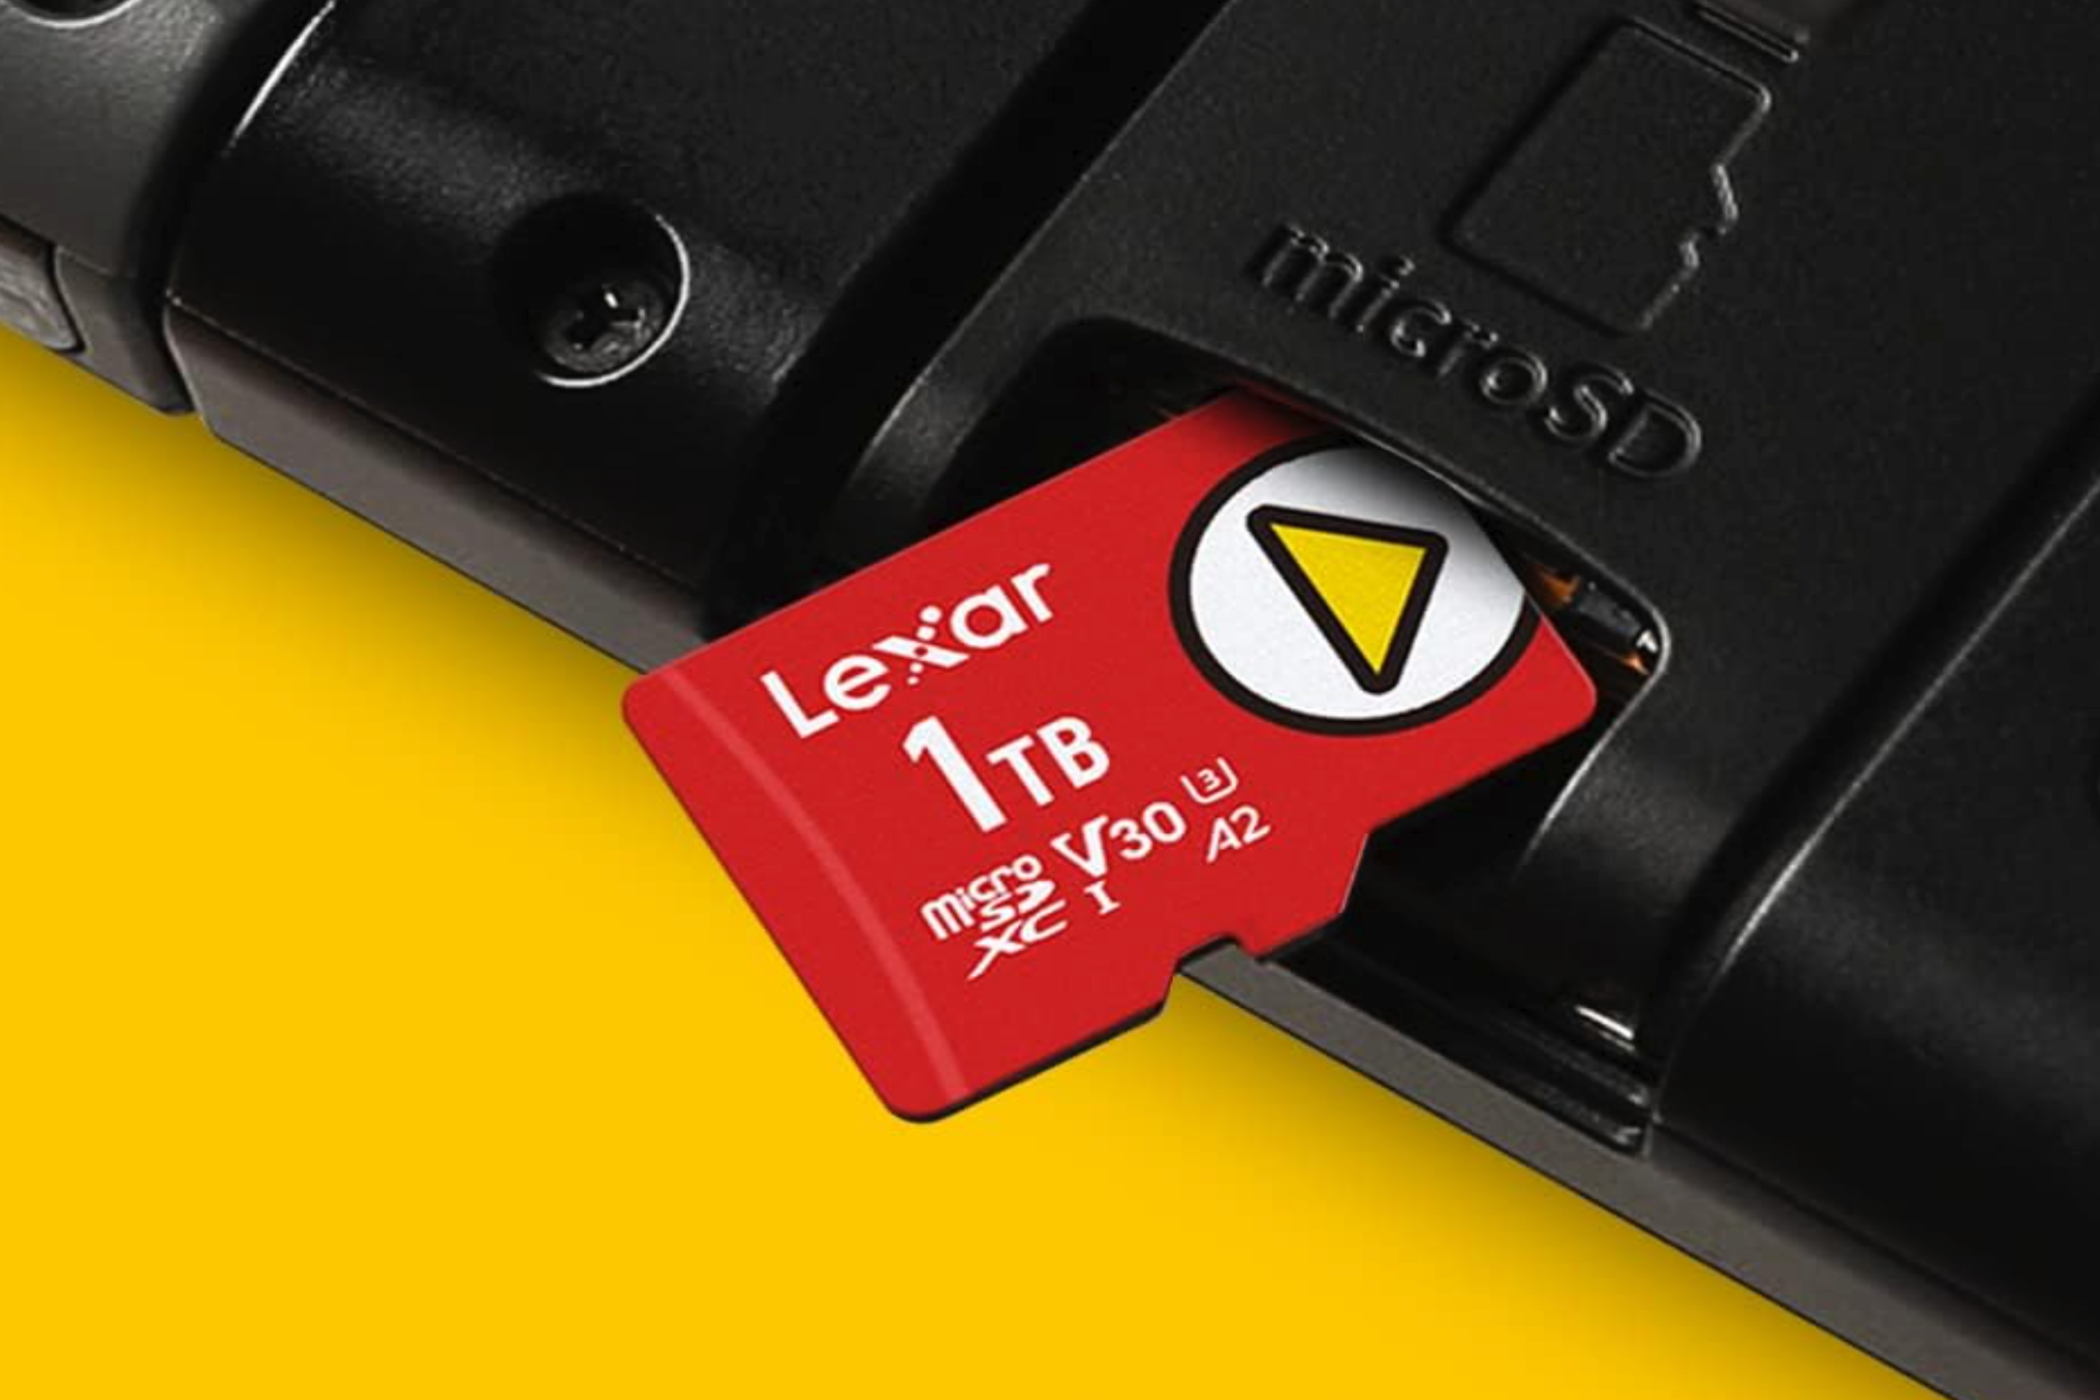 A Lexar Play 1TB microSDXC UHS-I being inserted into a microSD card slot